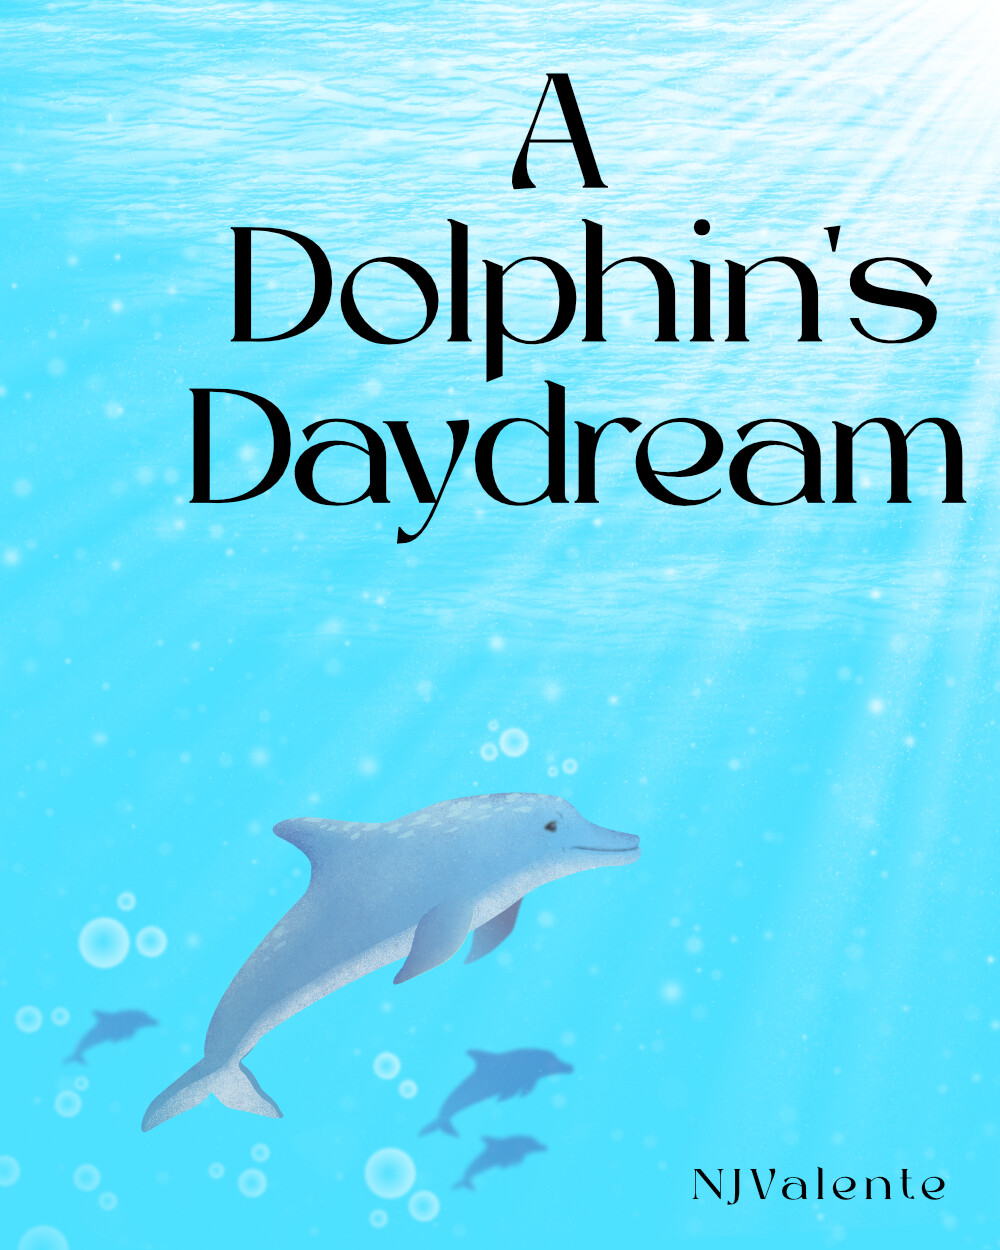 A Dolphin's Daydream Book Cover Illustration